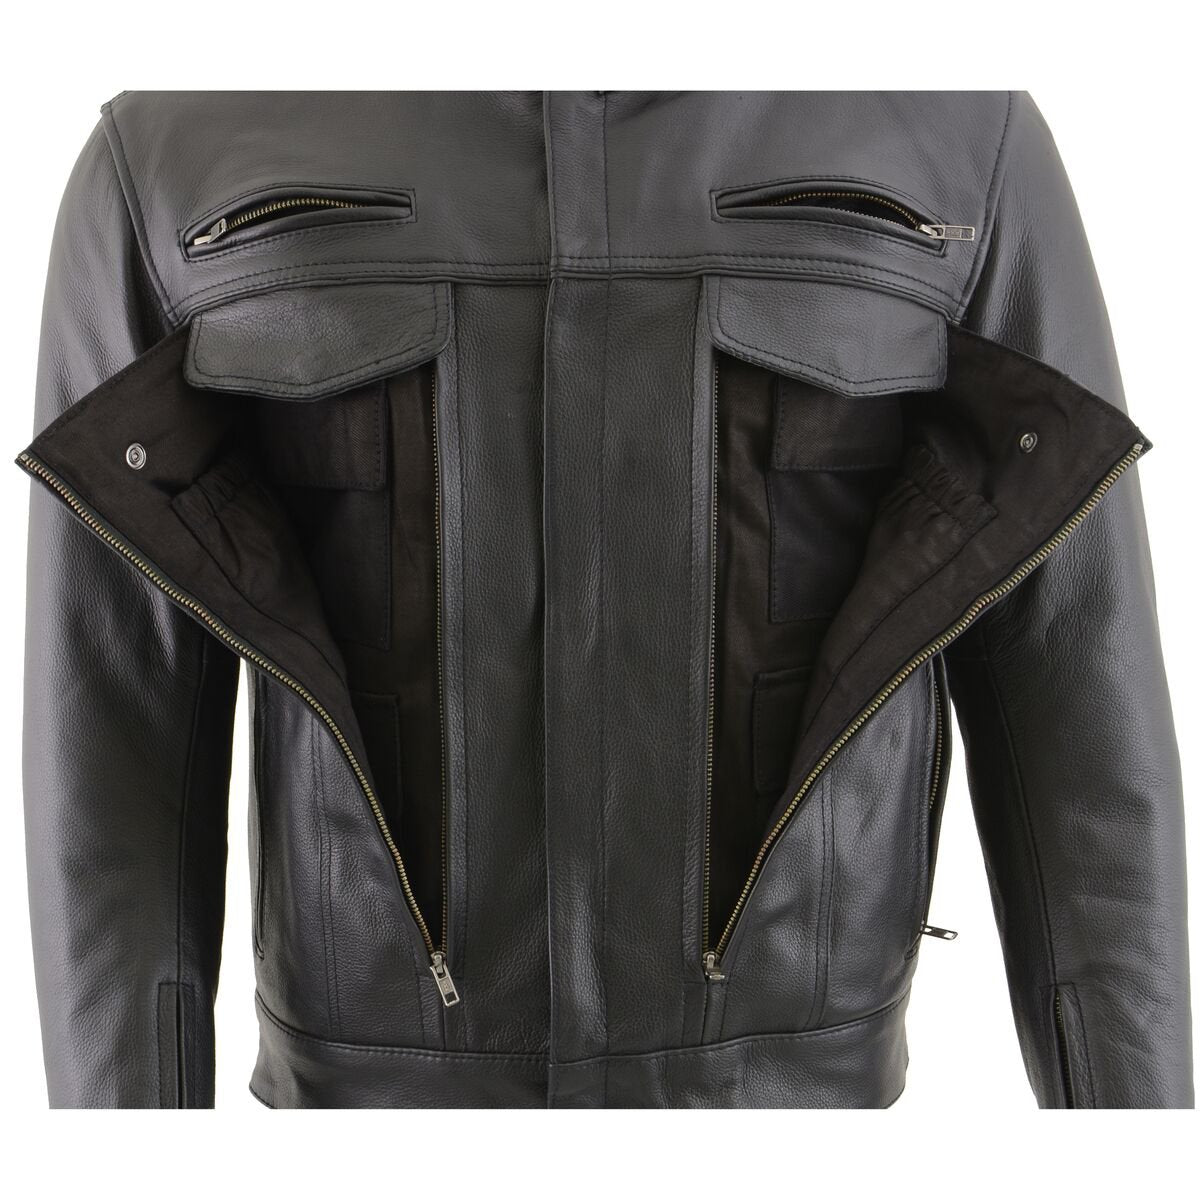 Milwaukee Leather MLM1506 Men's 'Cool-Tec' Black Leather Jacket with Utility and Gun Pockets - Milwaukeee Leather Mens Leather Jackets